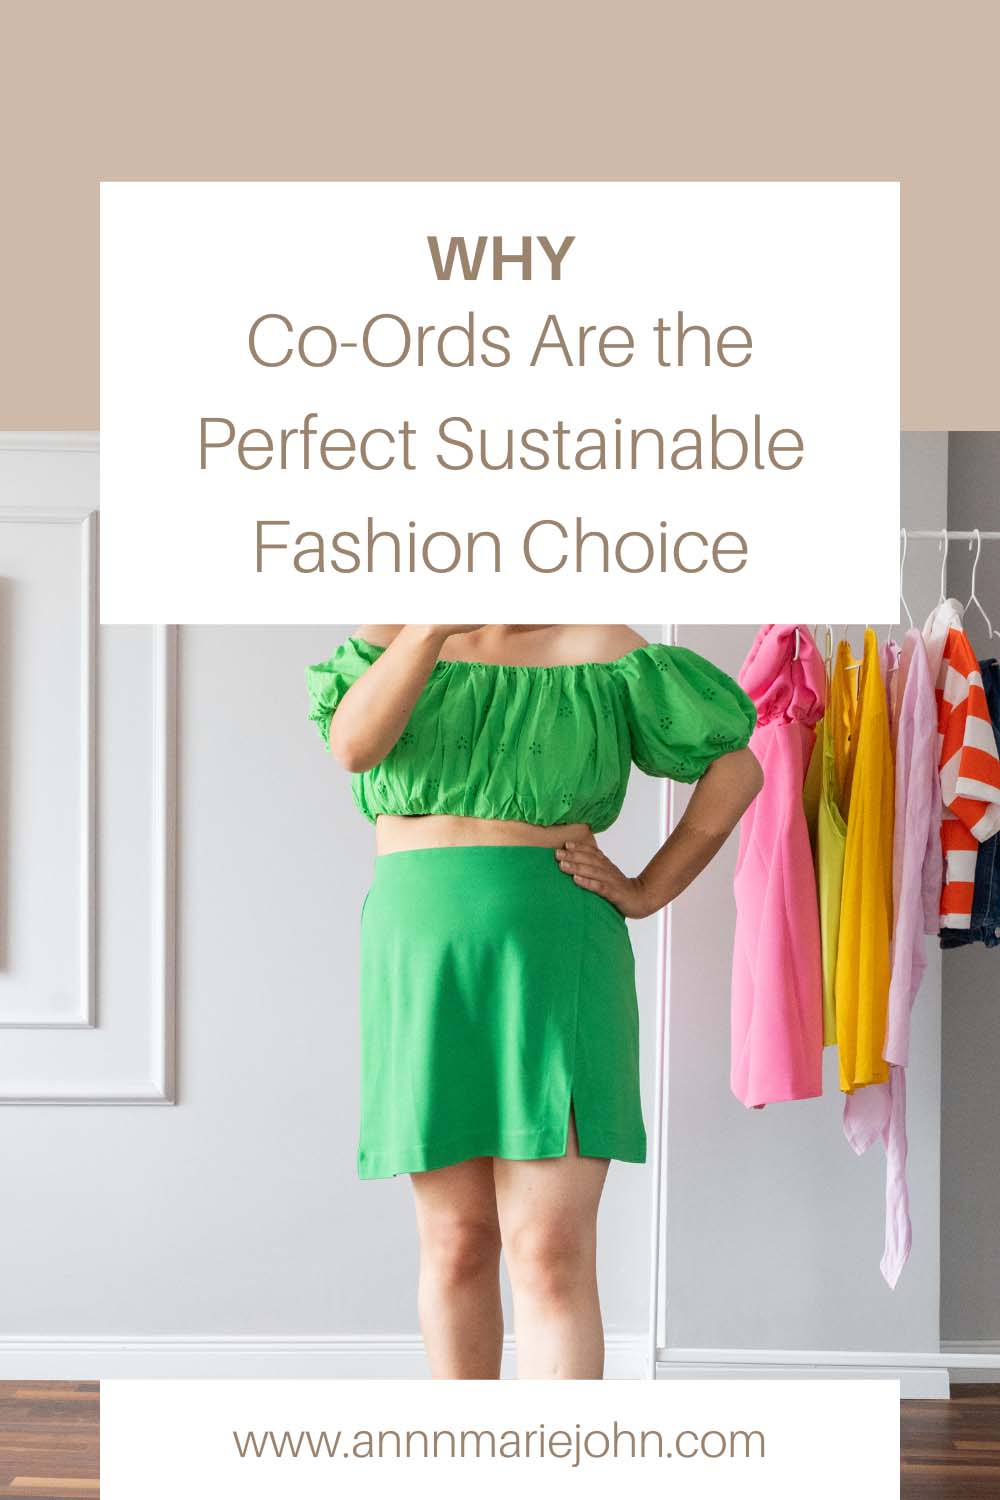 Why Co-Ords Are the Perfect Sustainable Fashion Choice